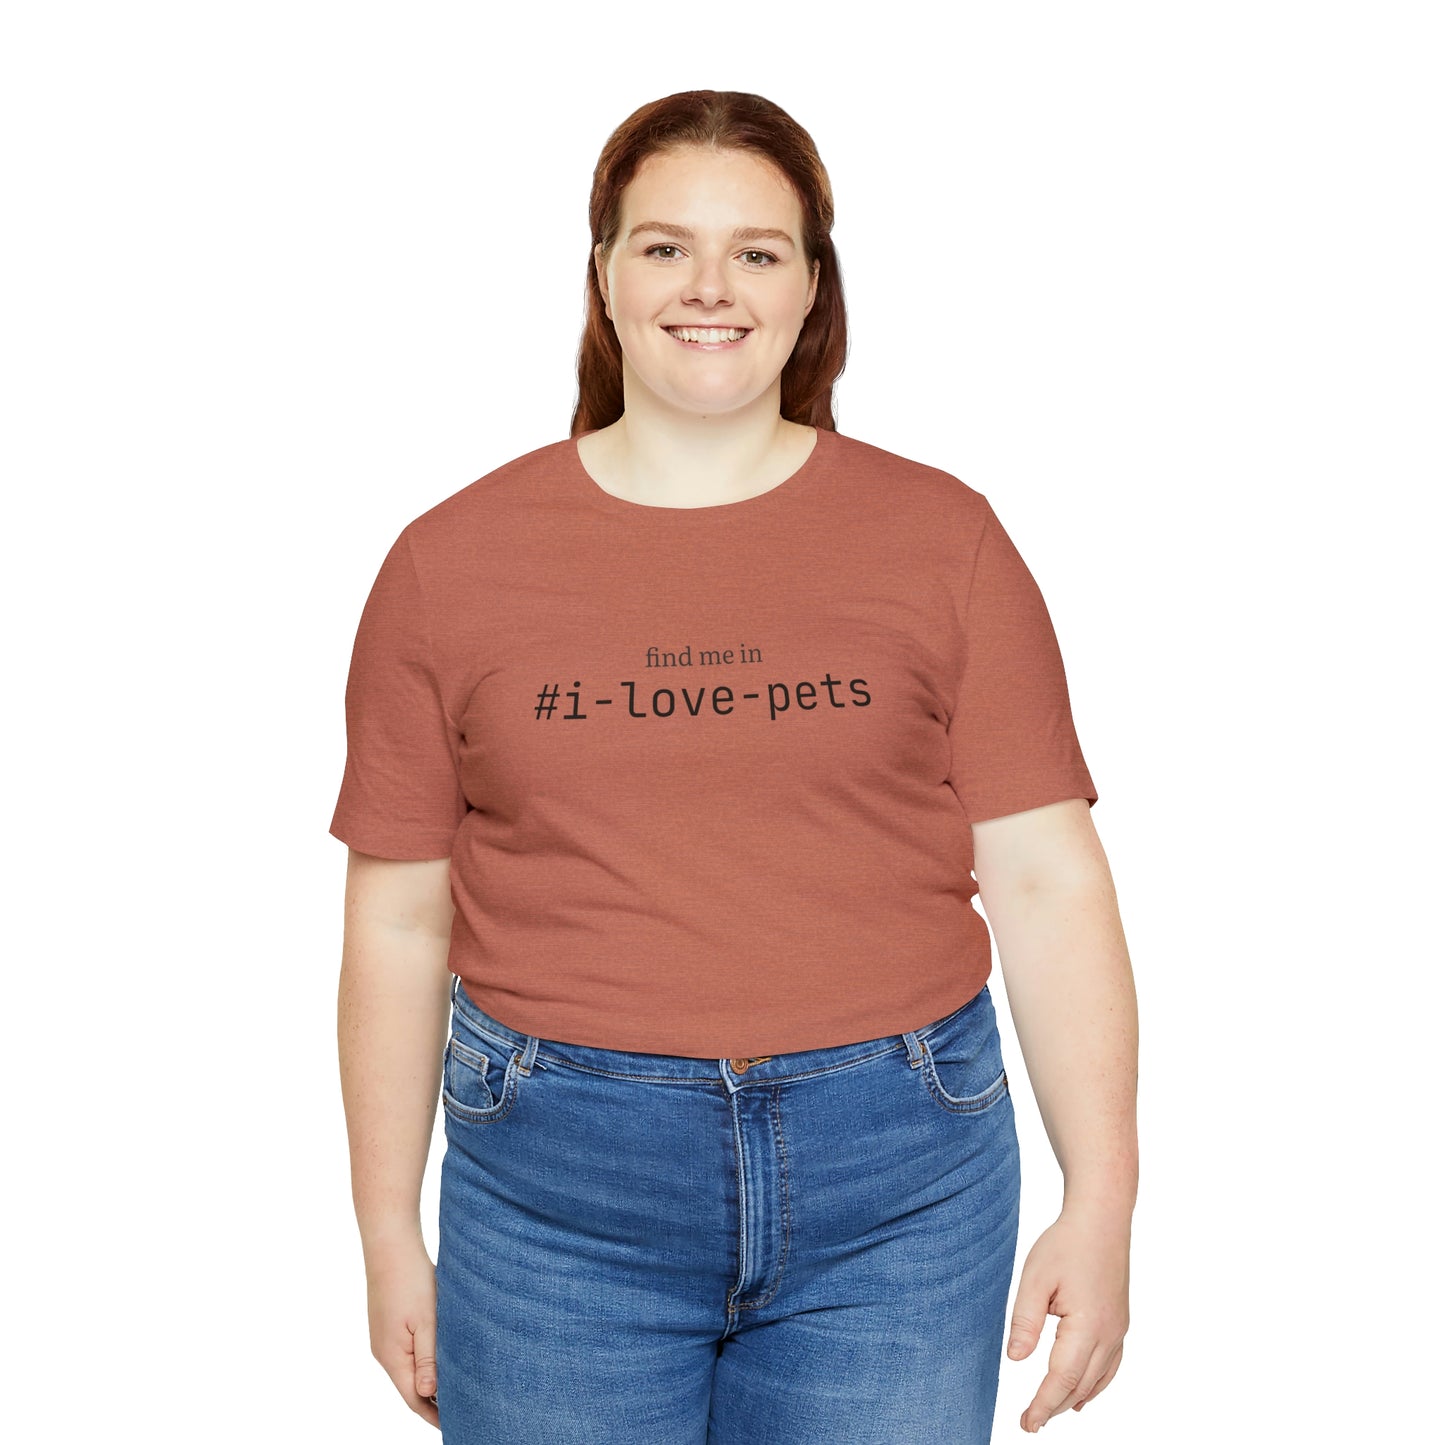 Find me in #i-love-pets T-Shirt